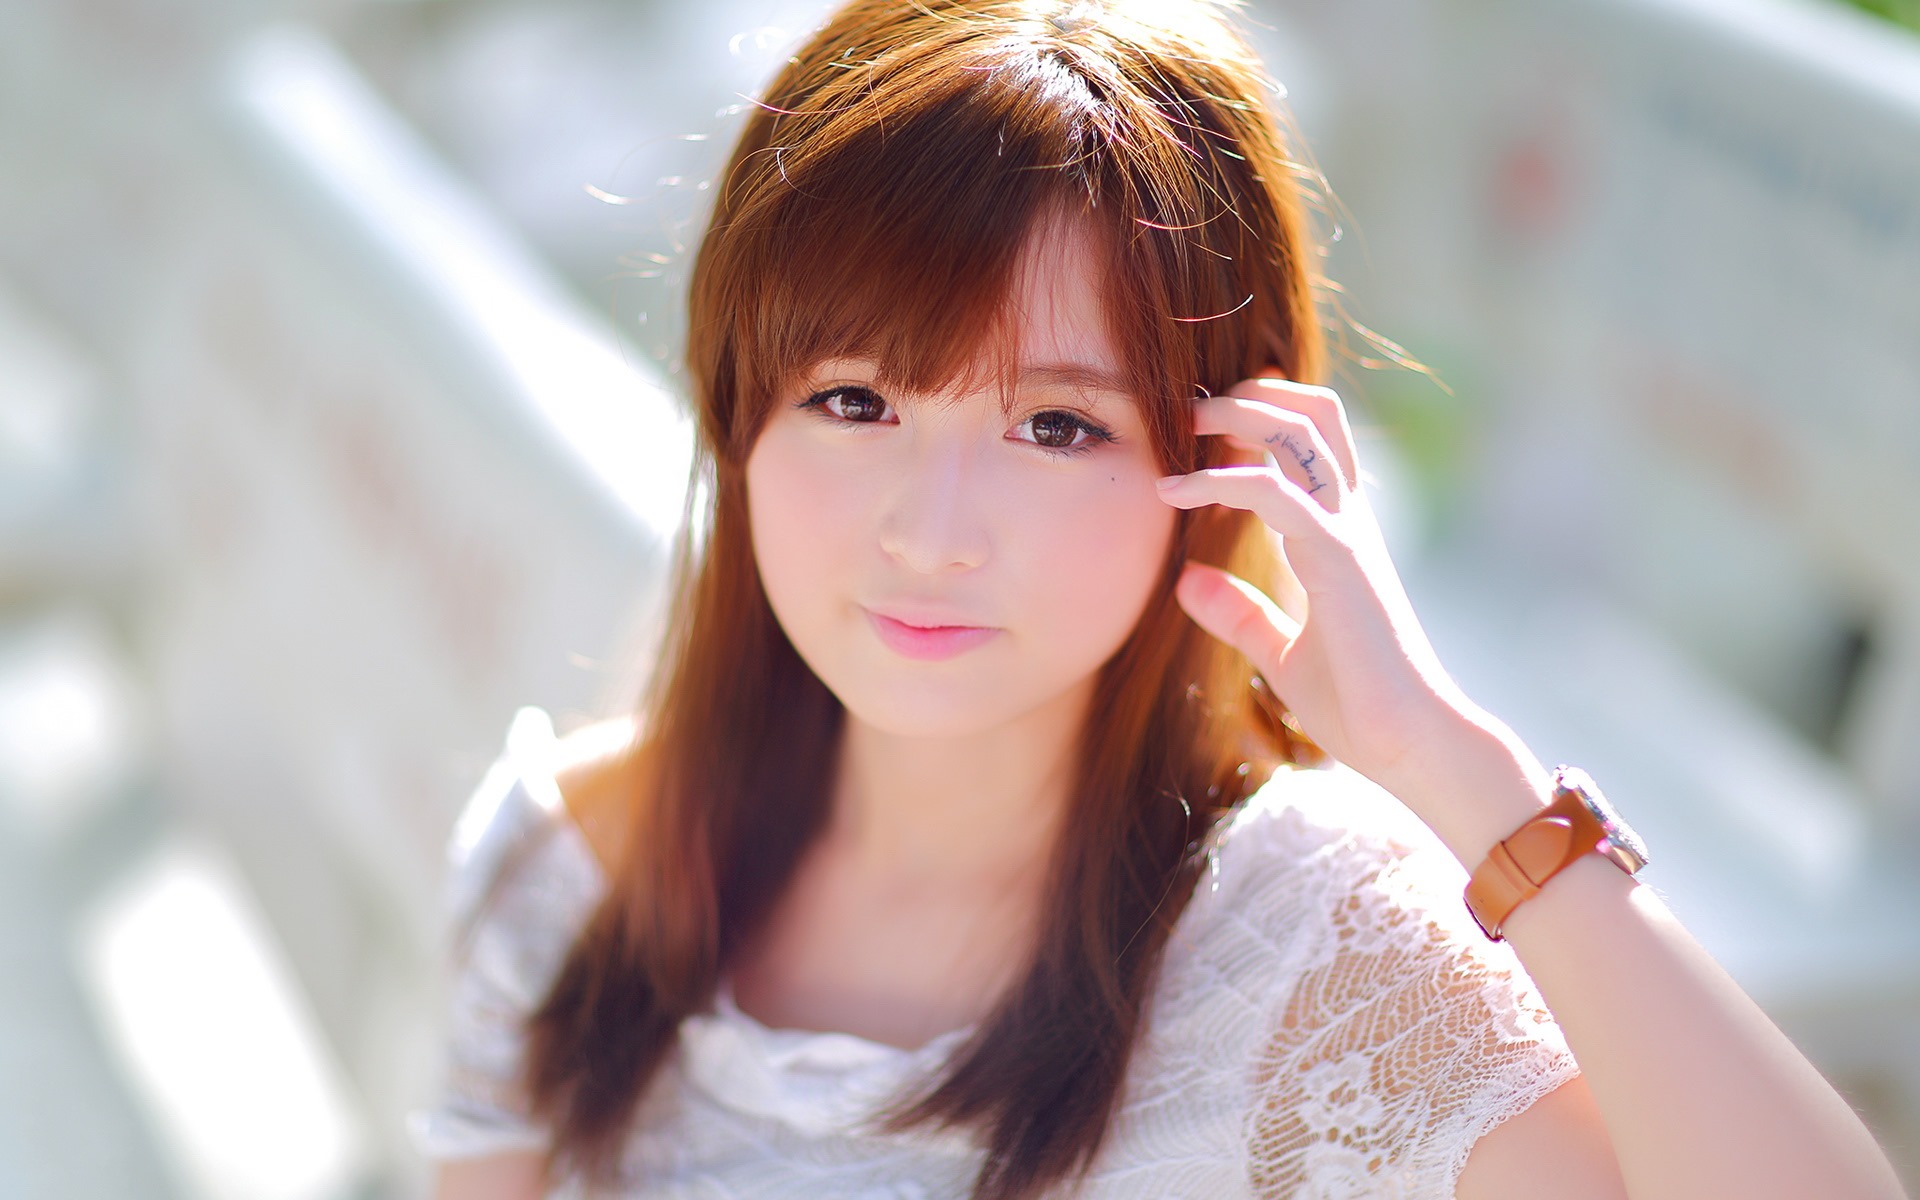 Pure and lovely young Asian girl HD wallpapers collection (2) #36 - 1920x1200